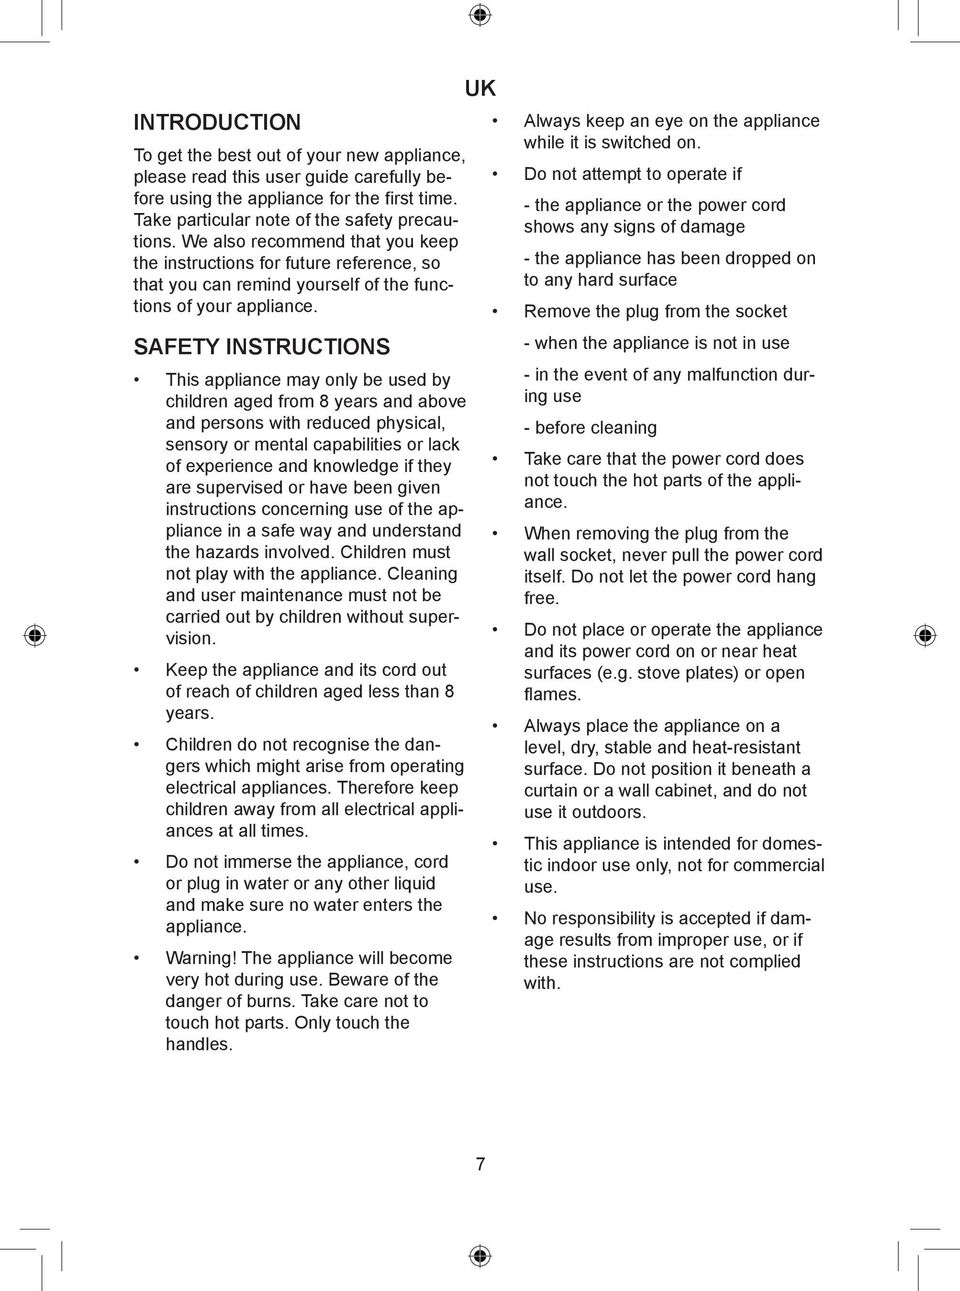 SAFETY INSTRUCTIONS This appliance may only be used by children aged from 8 years and above and persons with reduced physical, sensory or mental capabilities or lack of experience and knowledge if